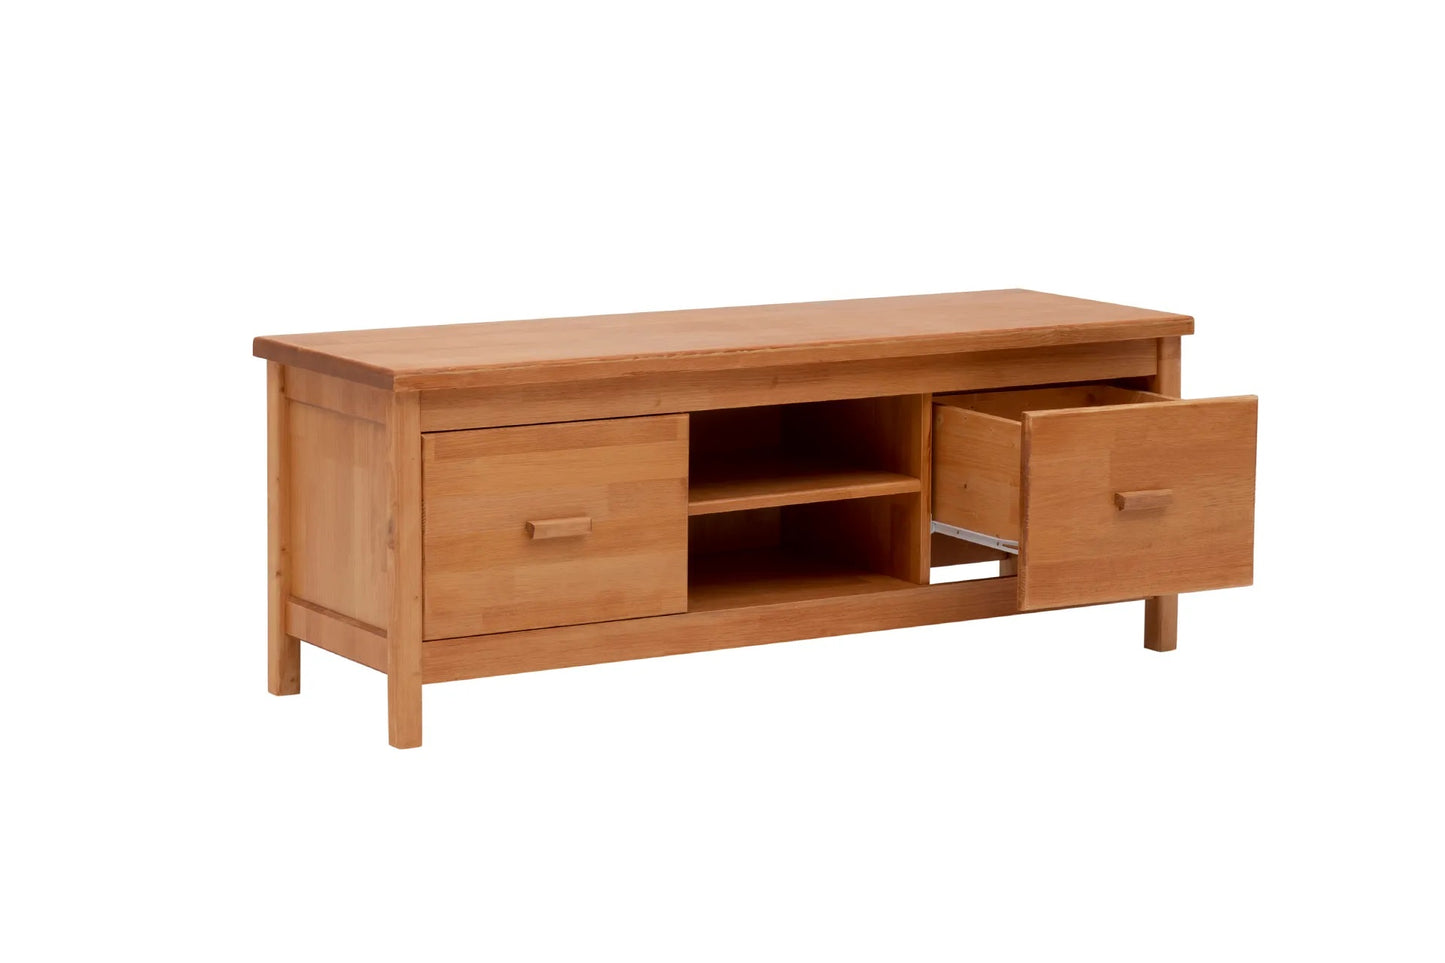 Dawn Solid Pine Wood Handmade TV Stand with Storage Drawers and Shelves for TVs up to 60"